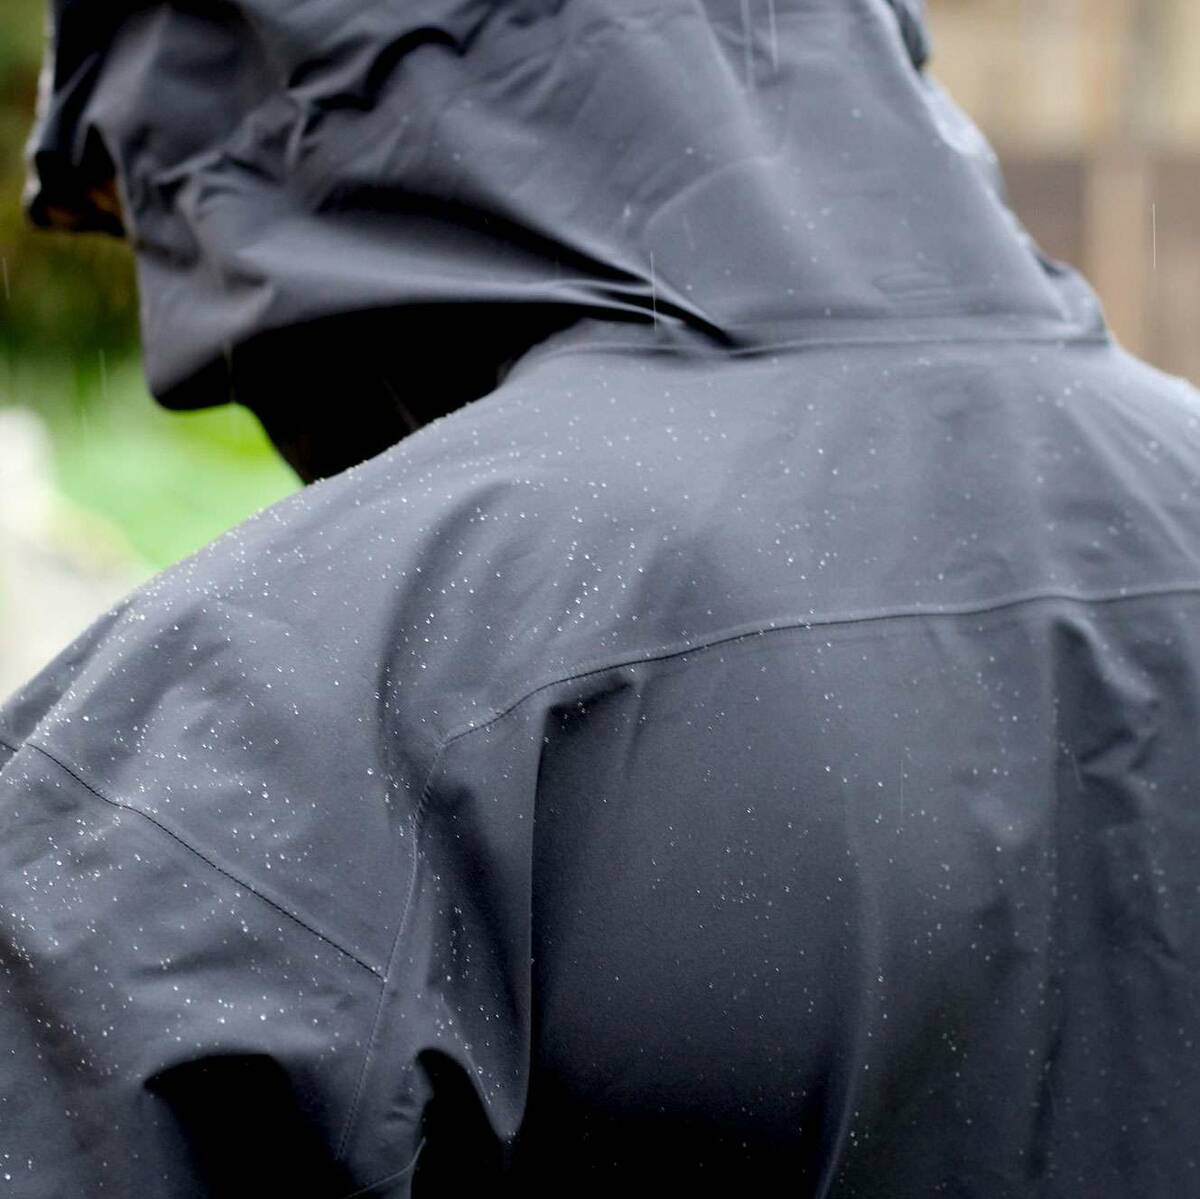 How to Re-Waterproof Your Old Rain Jacket with Nikwax 